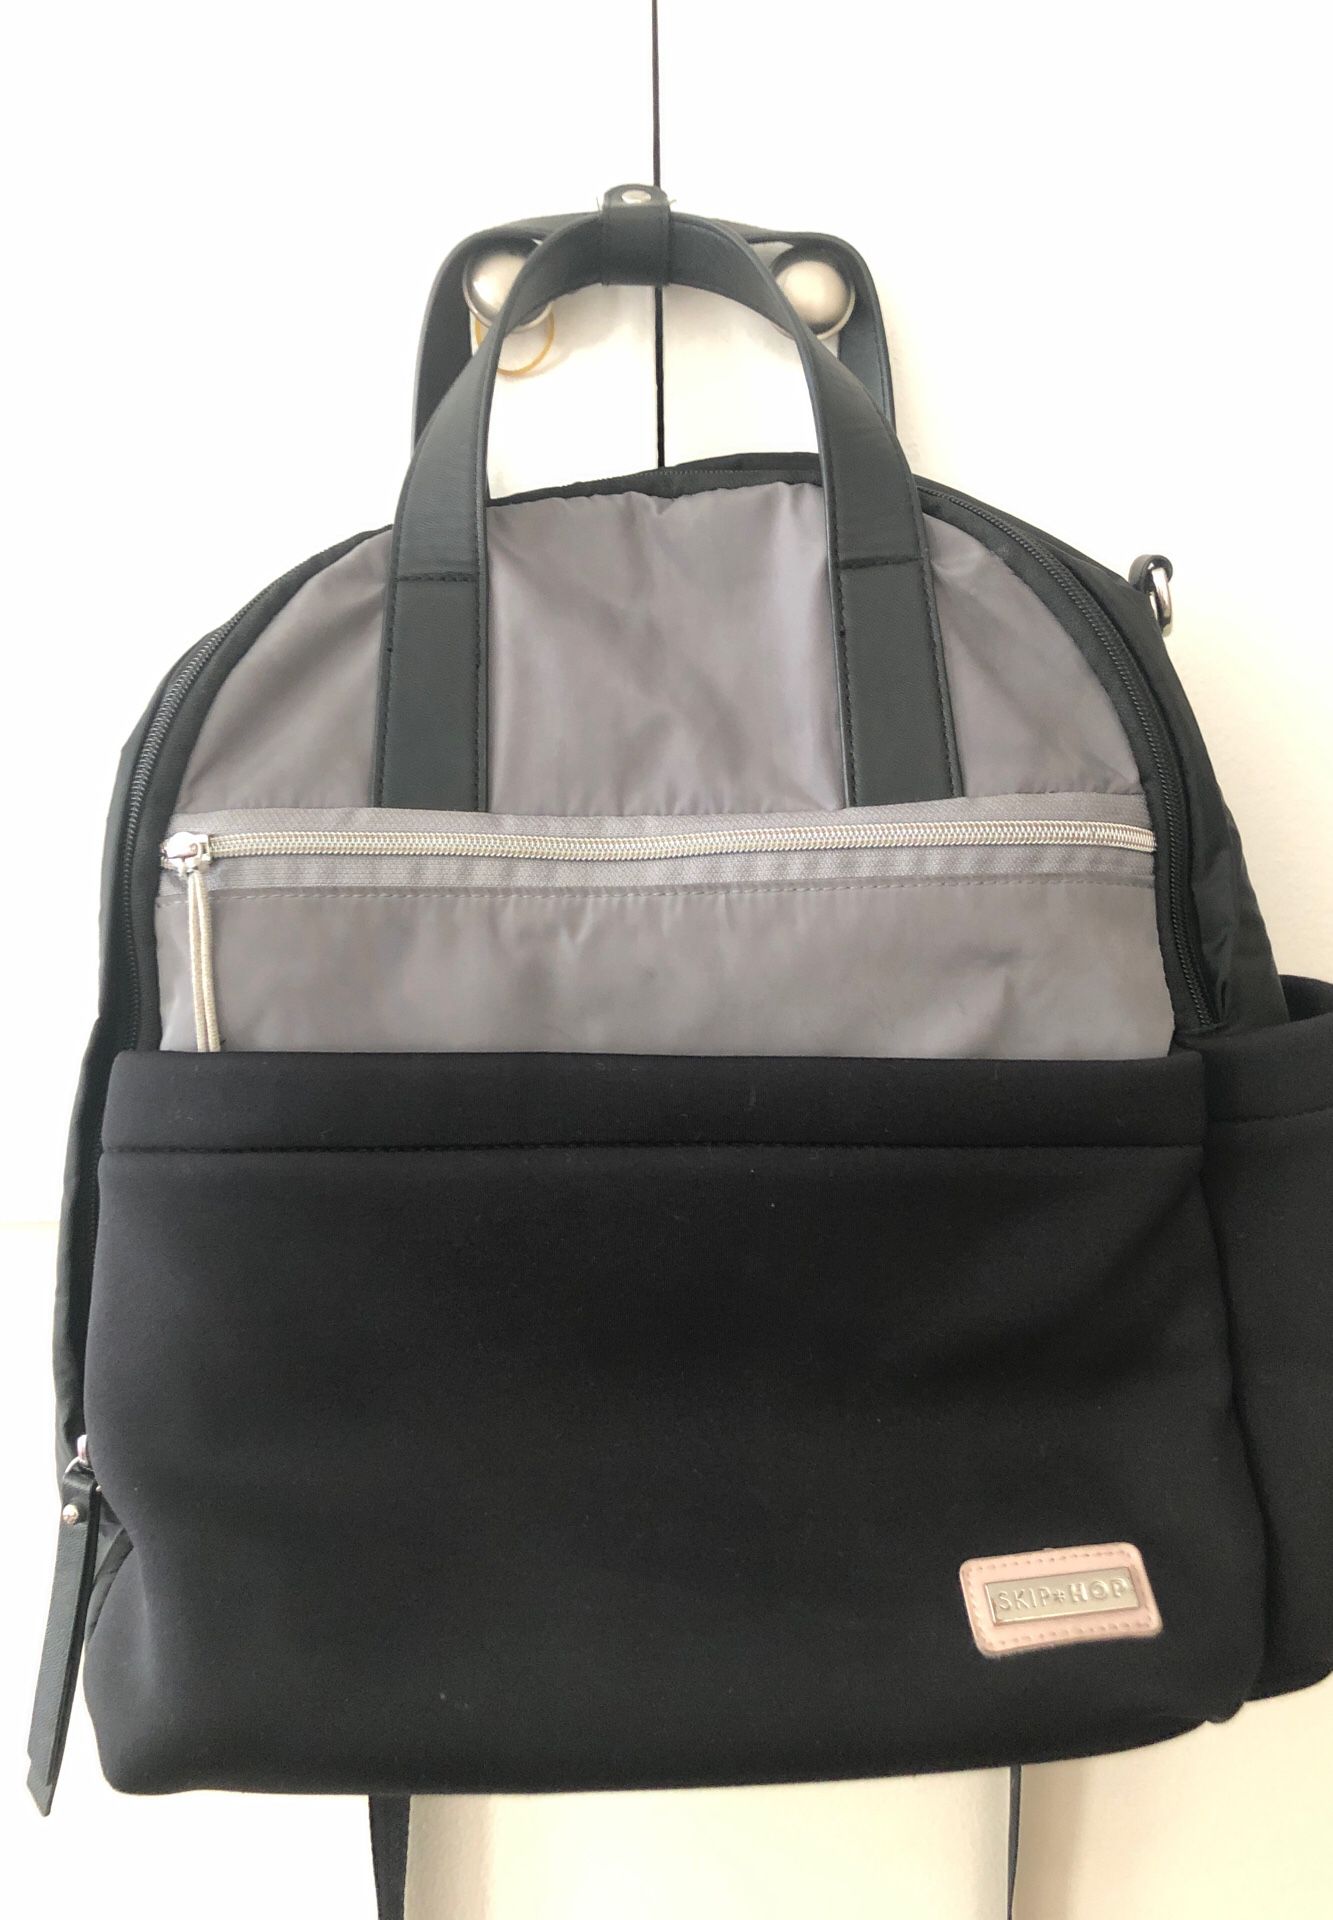 Diaper bag skip hop, black in a great condition.